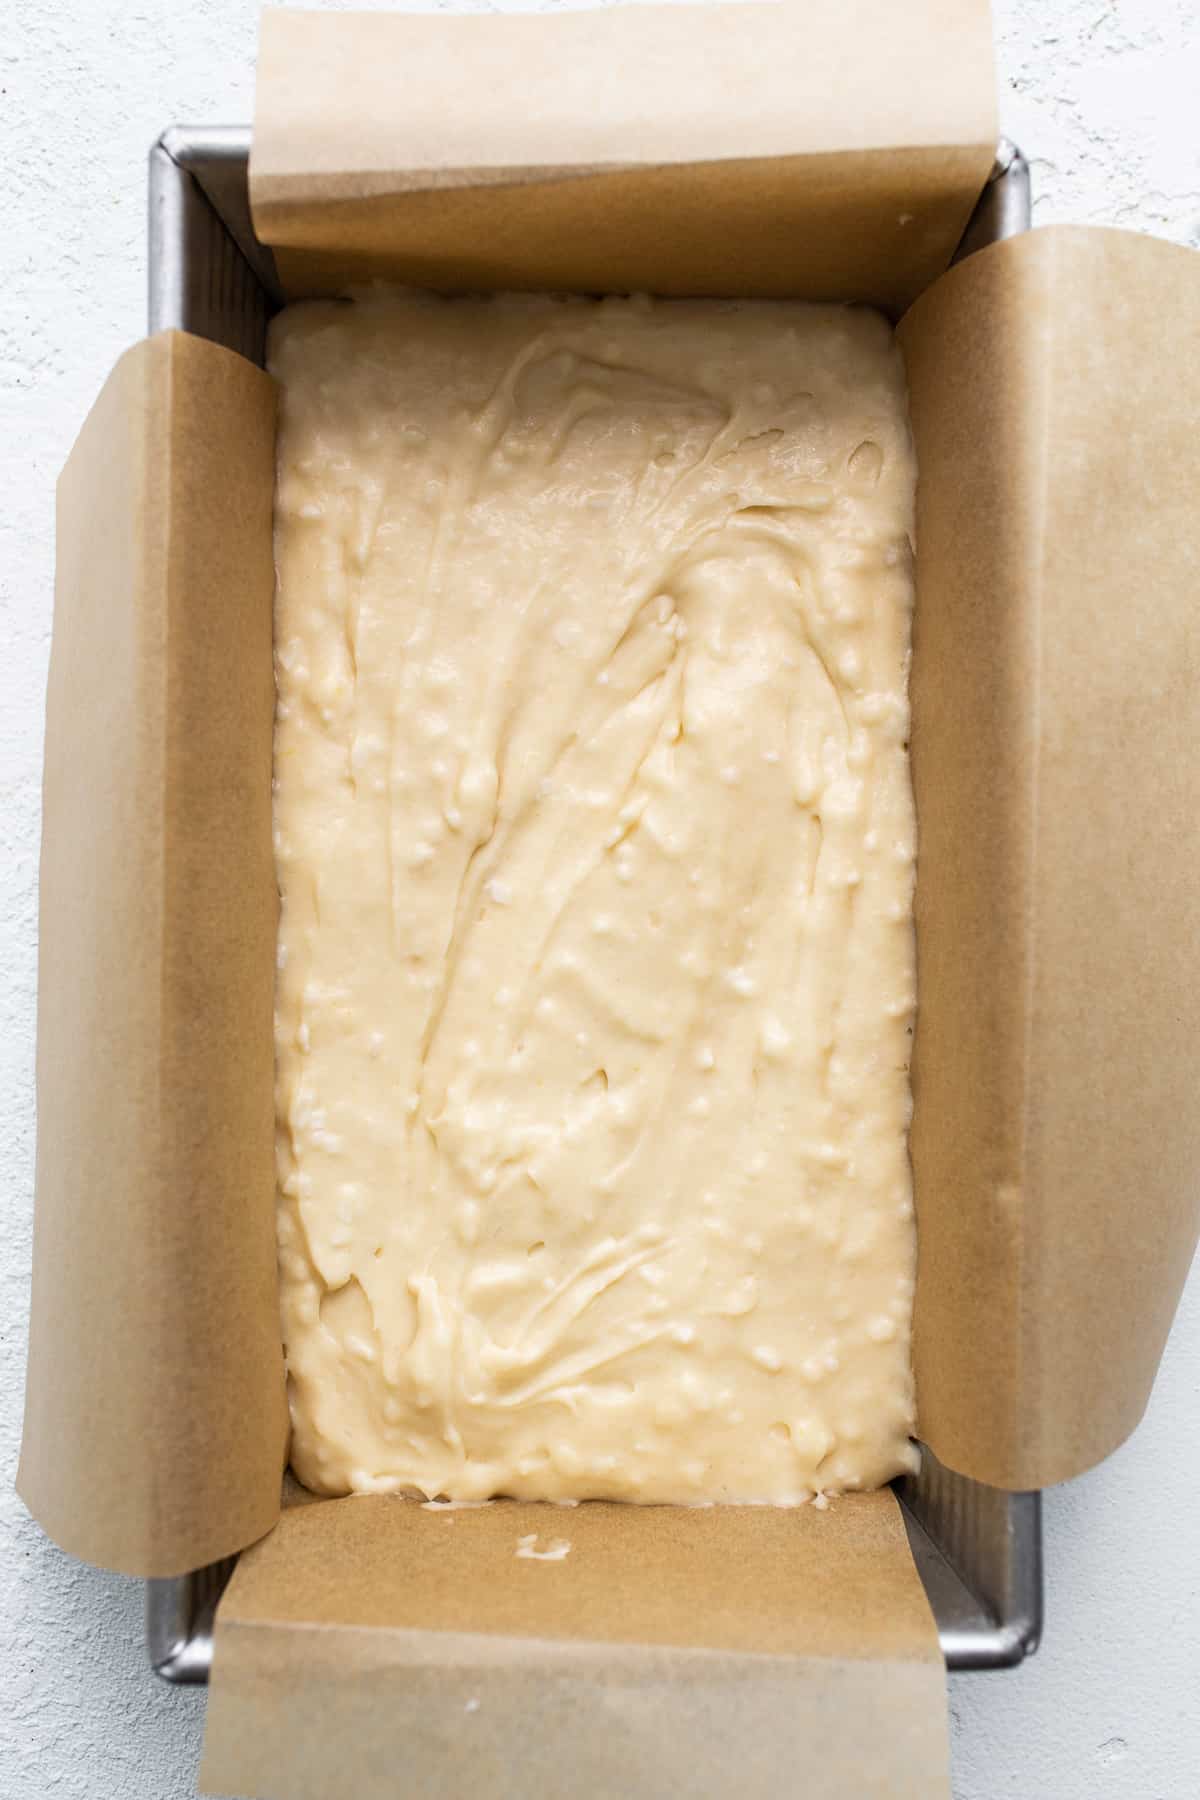 Cake batter in the loaf pan.